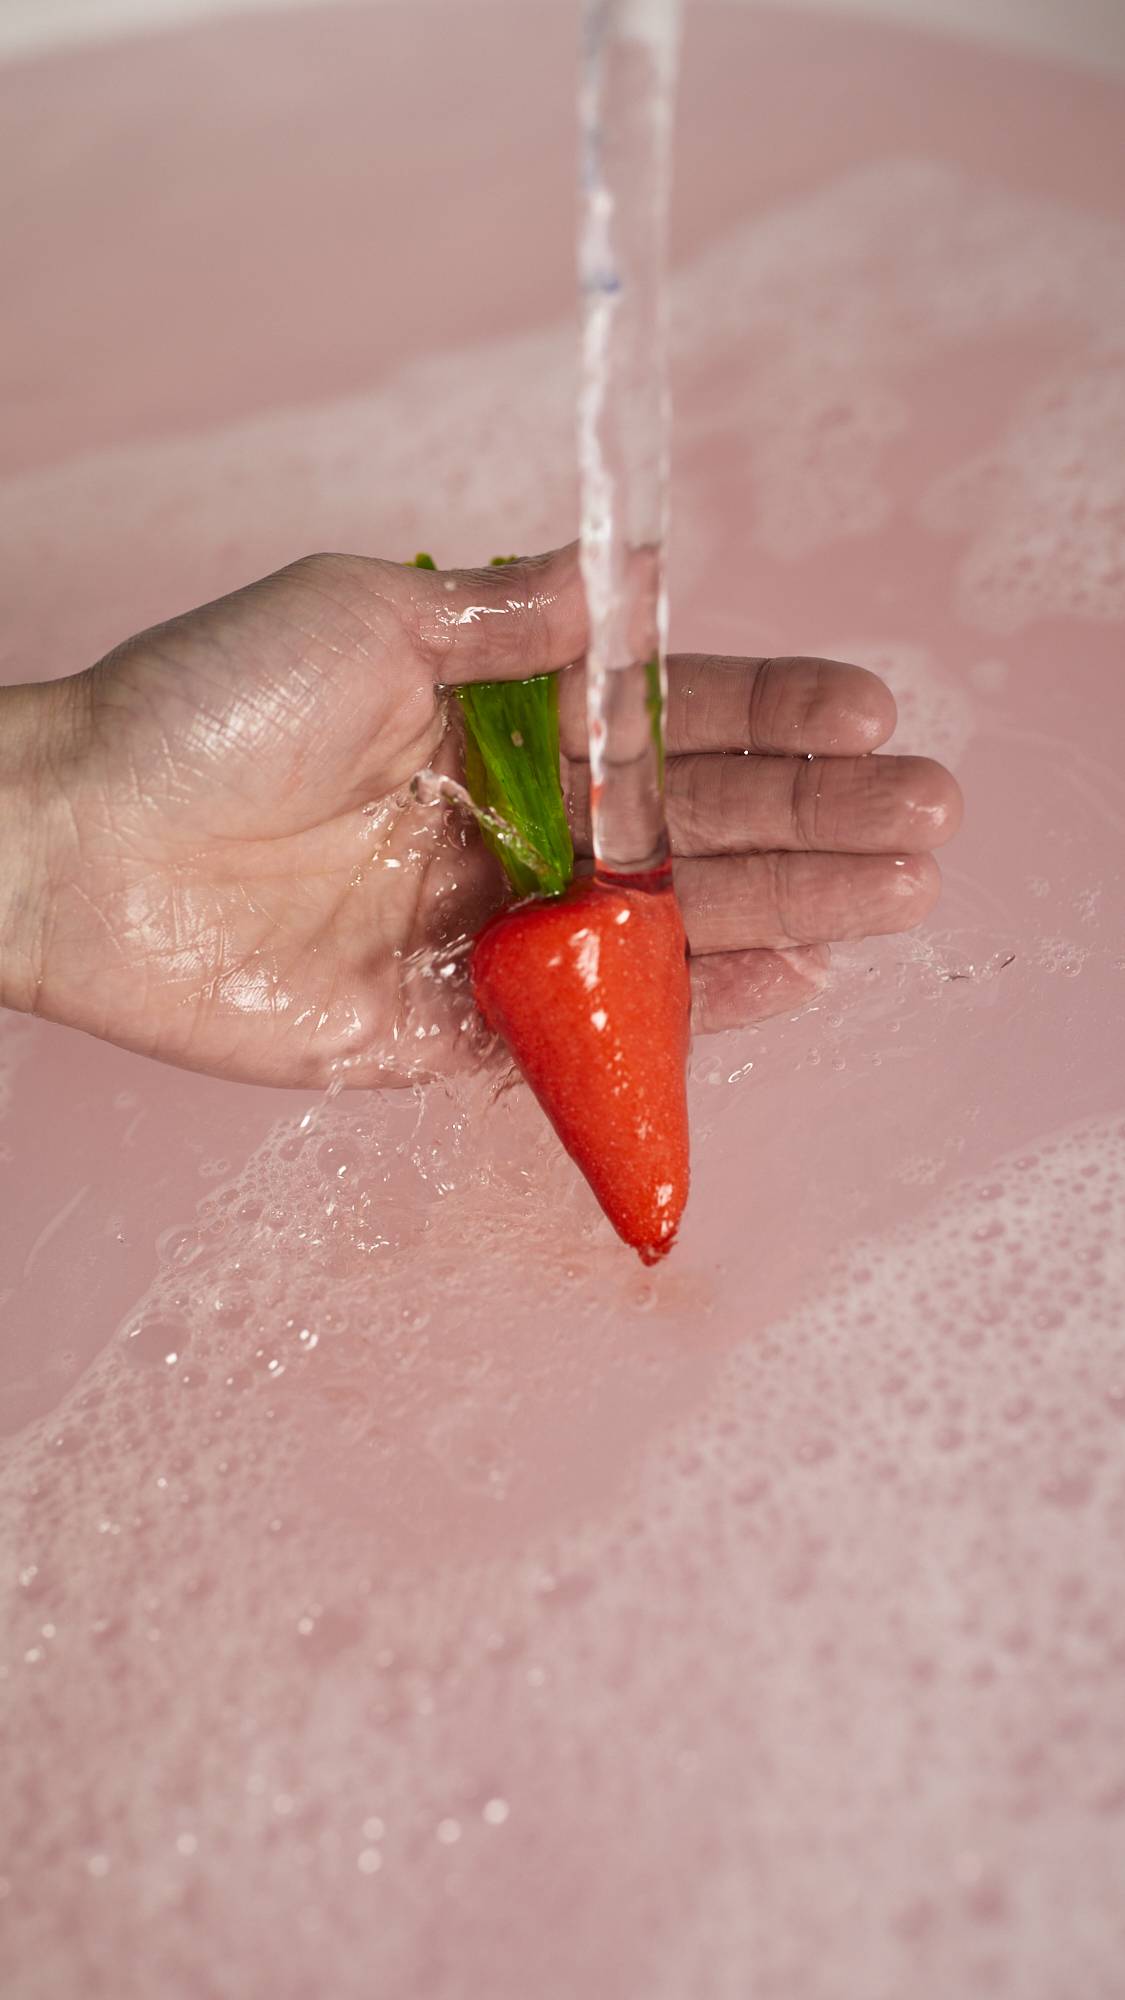 A close-up image of the model's hand holding the red carrot bubble bar by the green leaves under running tap water into the bath below. 